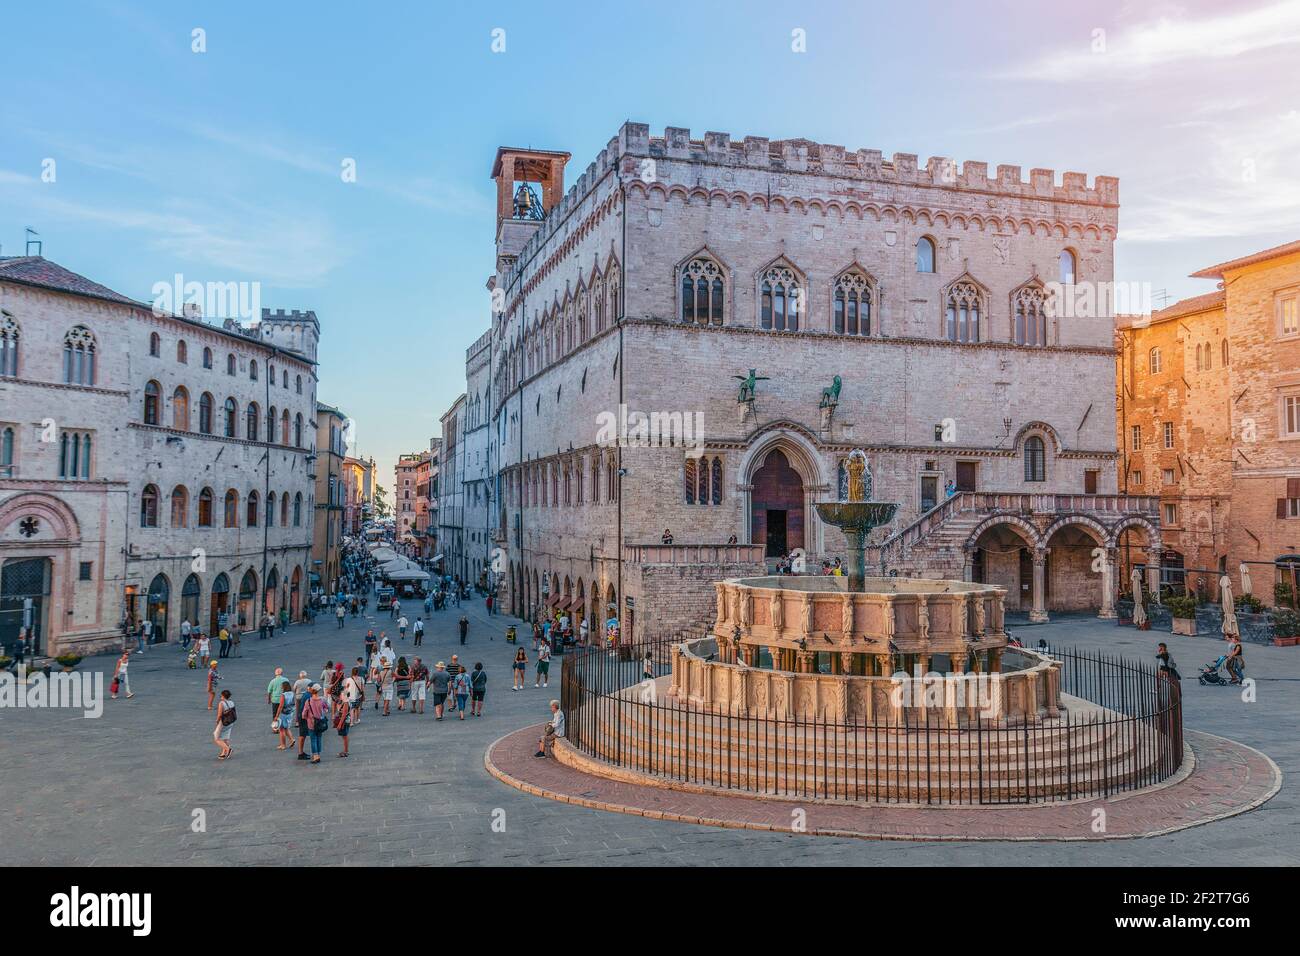 PERUGIA, ITALY - SEPTEMBER 11, 2018: View of the scenic main square (Piazza IV Novembre) and fountain (Fontana Maggiore) masterpiece of medieval archi Stock Photo